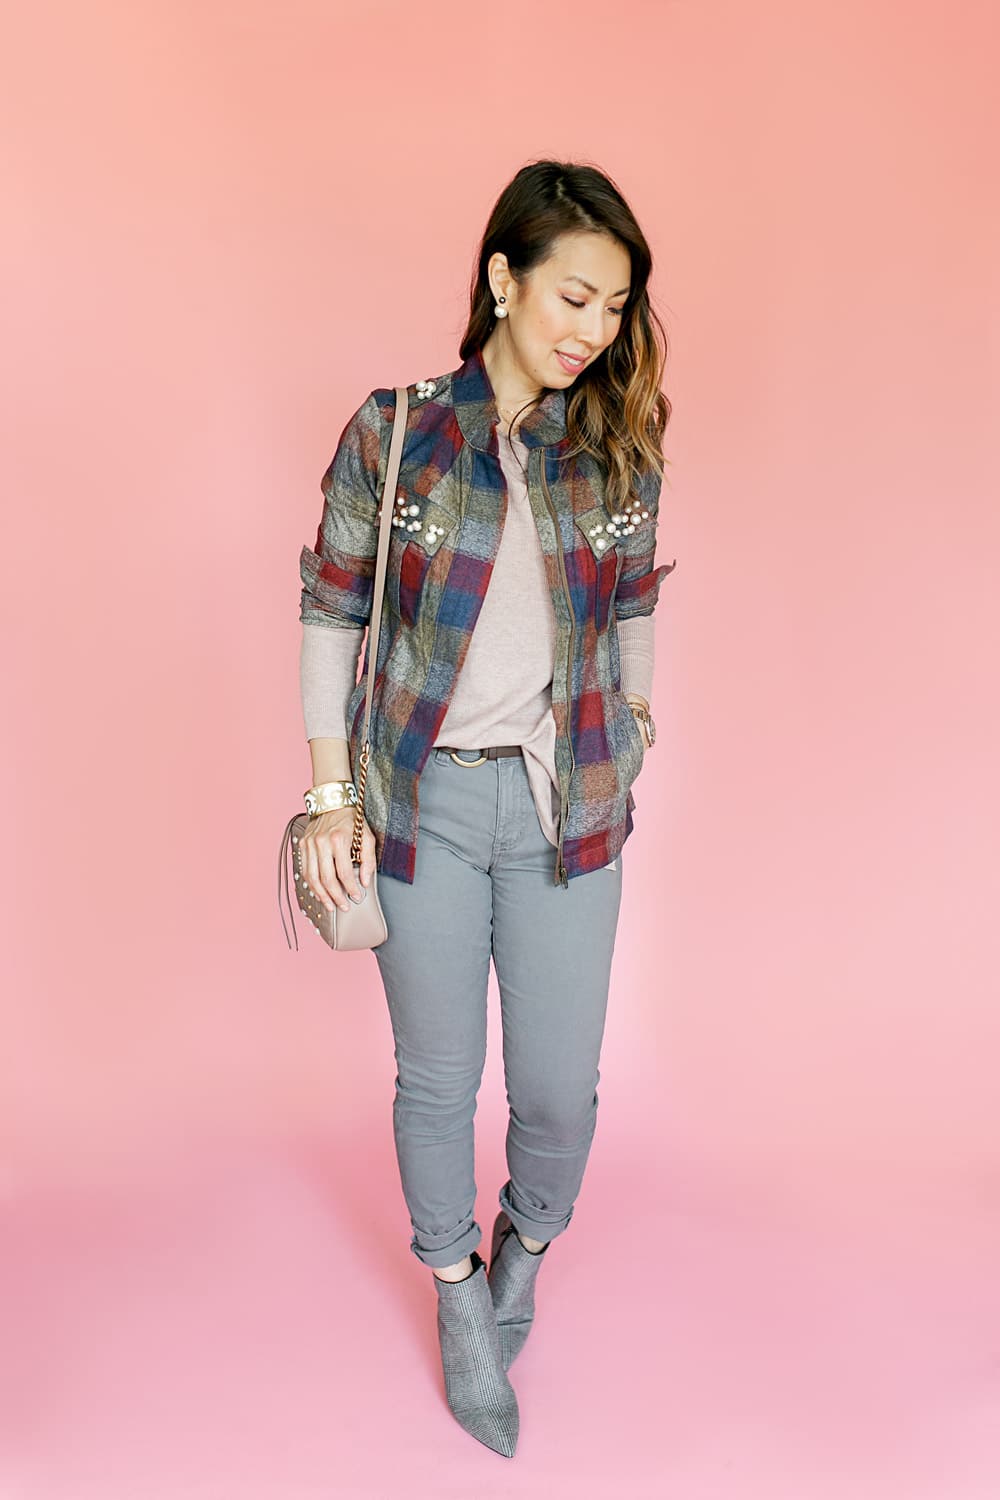 style of sam in cabi fall 2018 pearl plaid collage jacket dandy boot